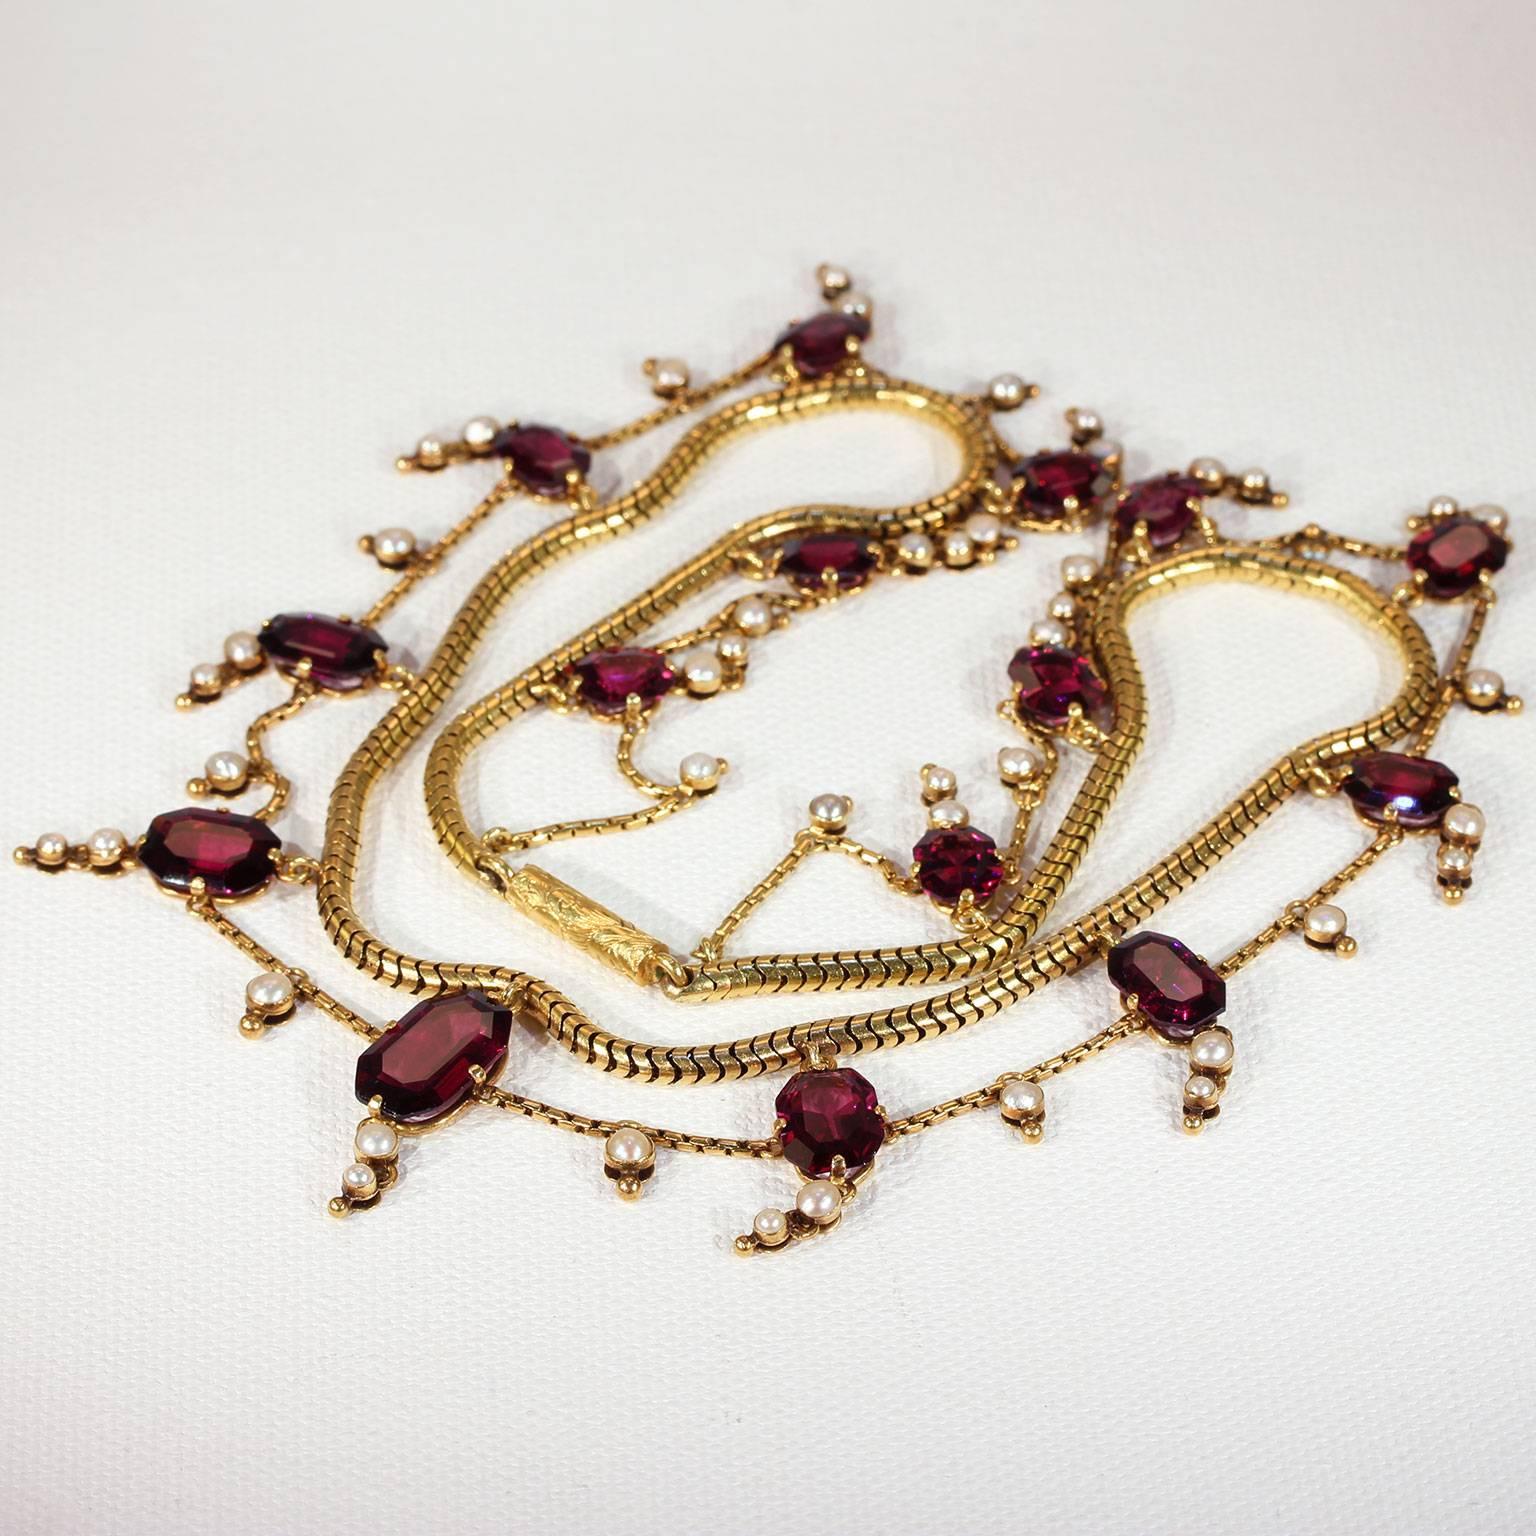 This breathtaking Victorian garnet and pearl gold necklace was handcrafted in England around 1850-60 and comes inside its original fitted box. The double chain measures 16.25 inches in length and is made up of a snake chain with a looping link